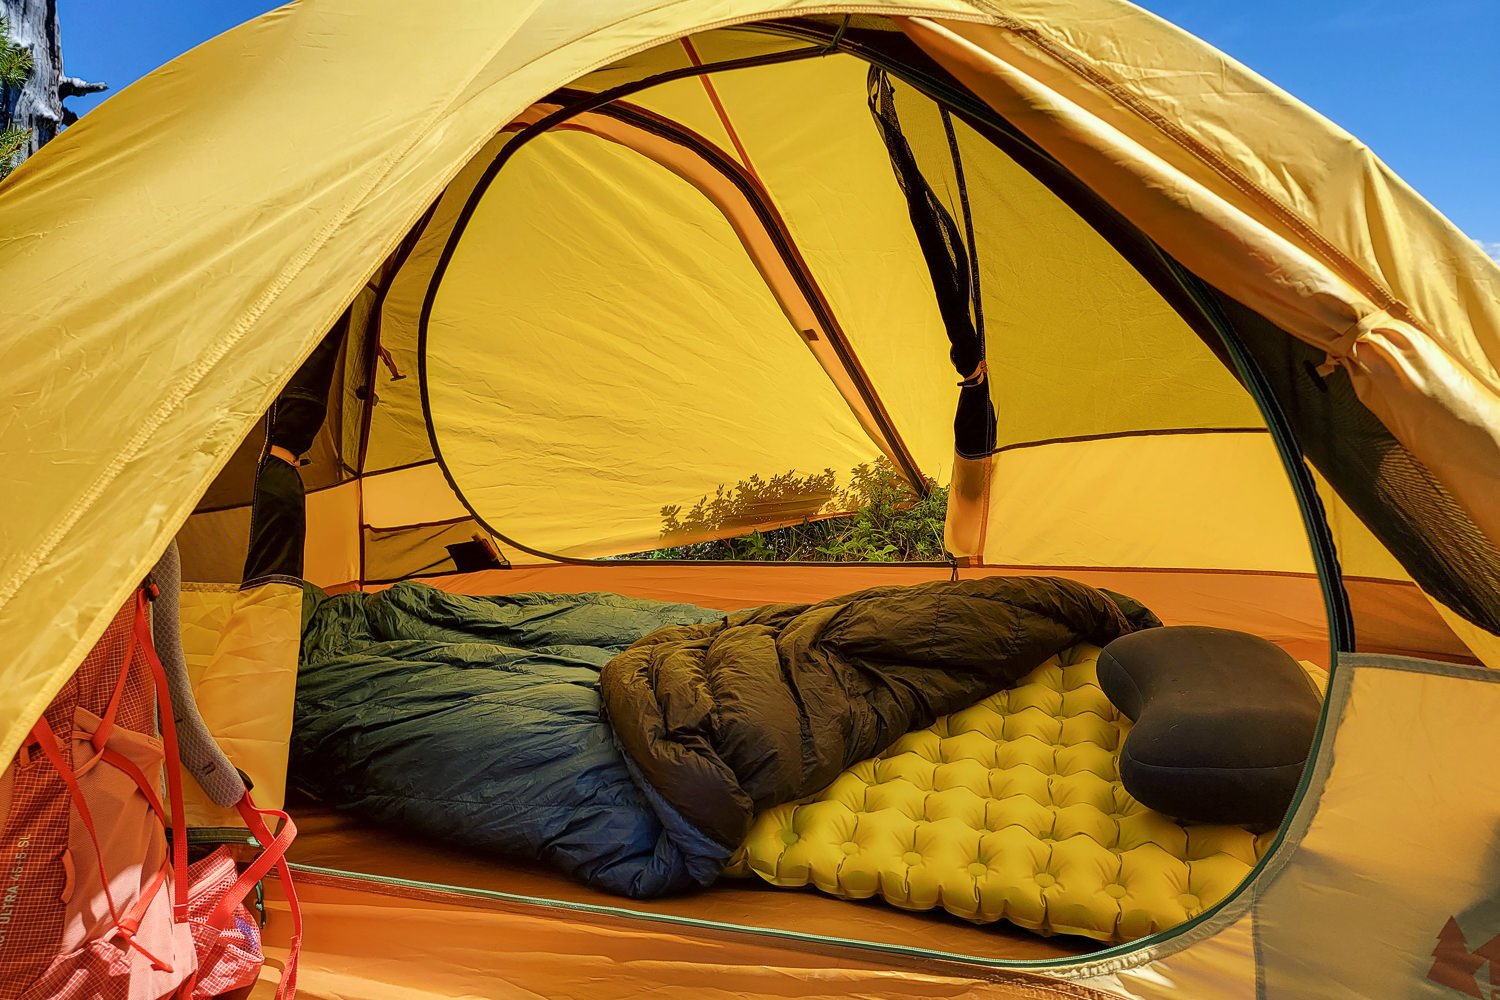 An interior view of the Trailmade 2 tent with both doors open and a sleeping bag and sleeping pad on the inside